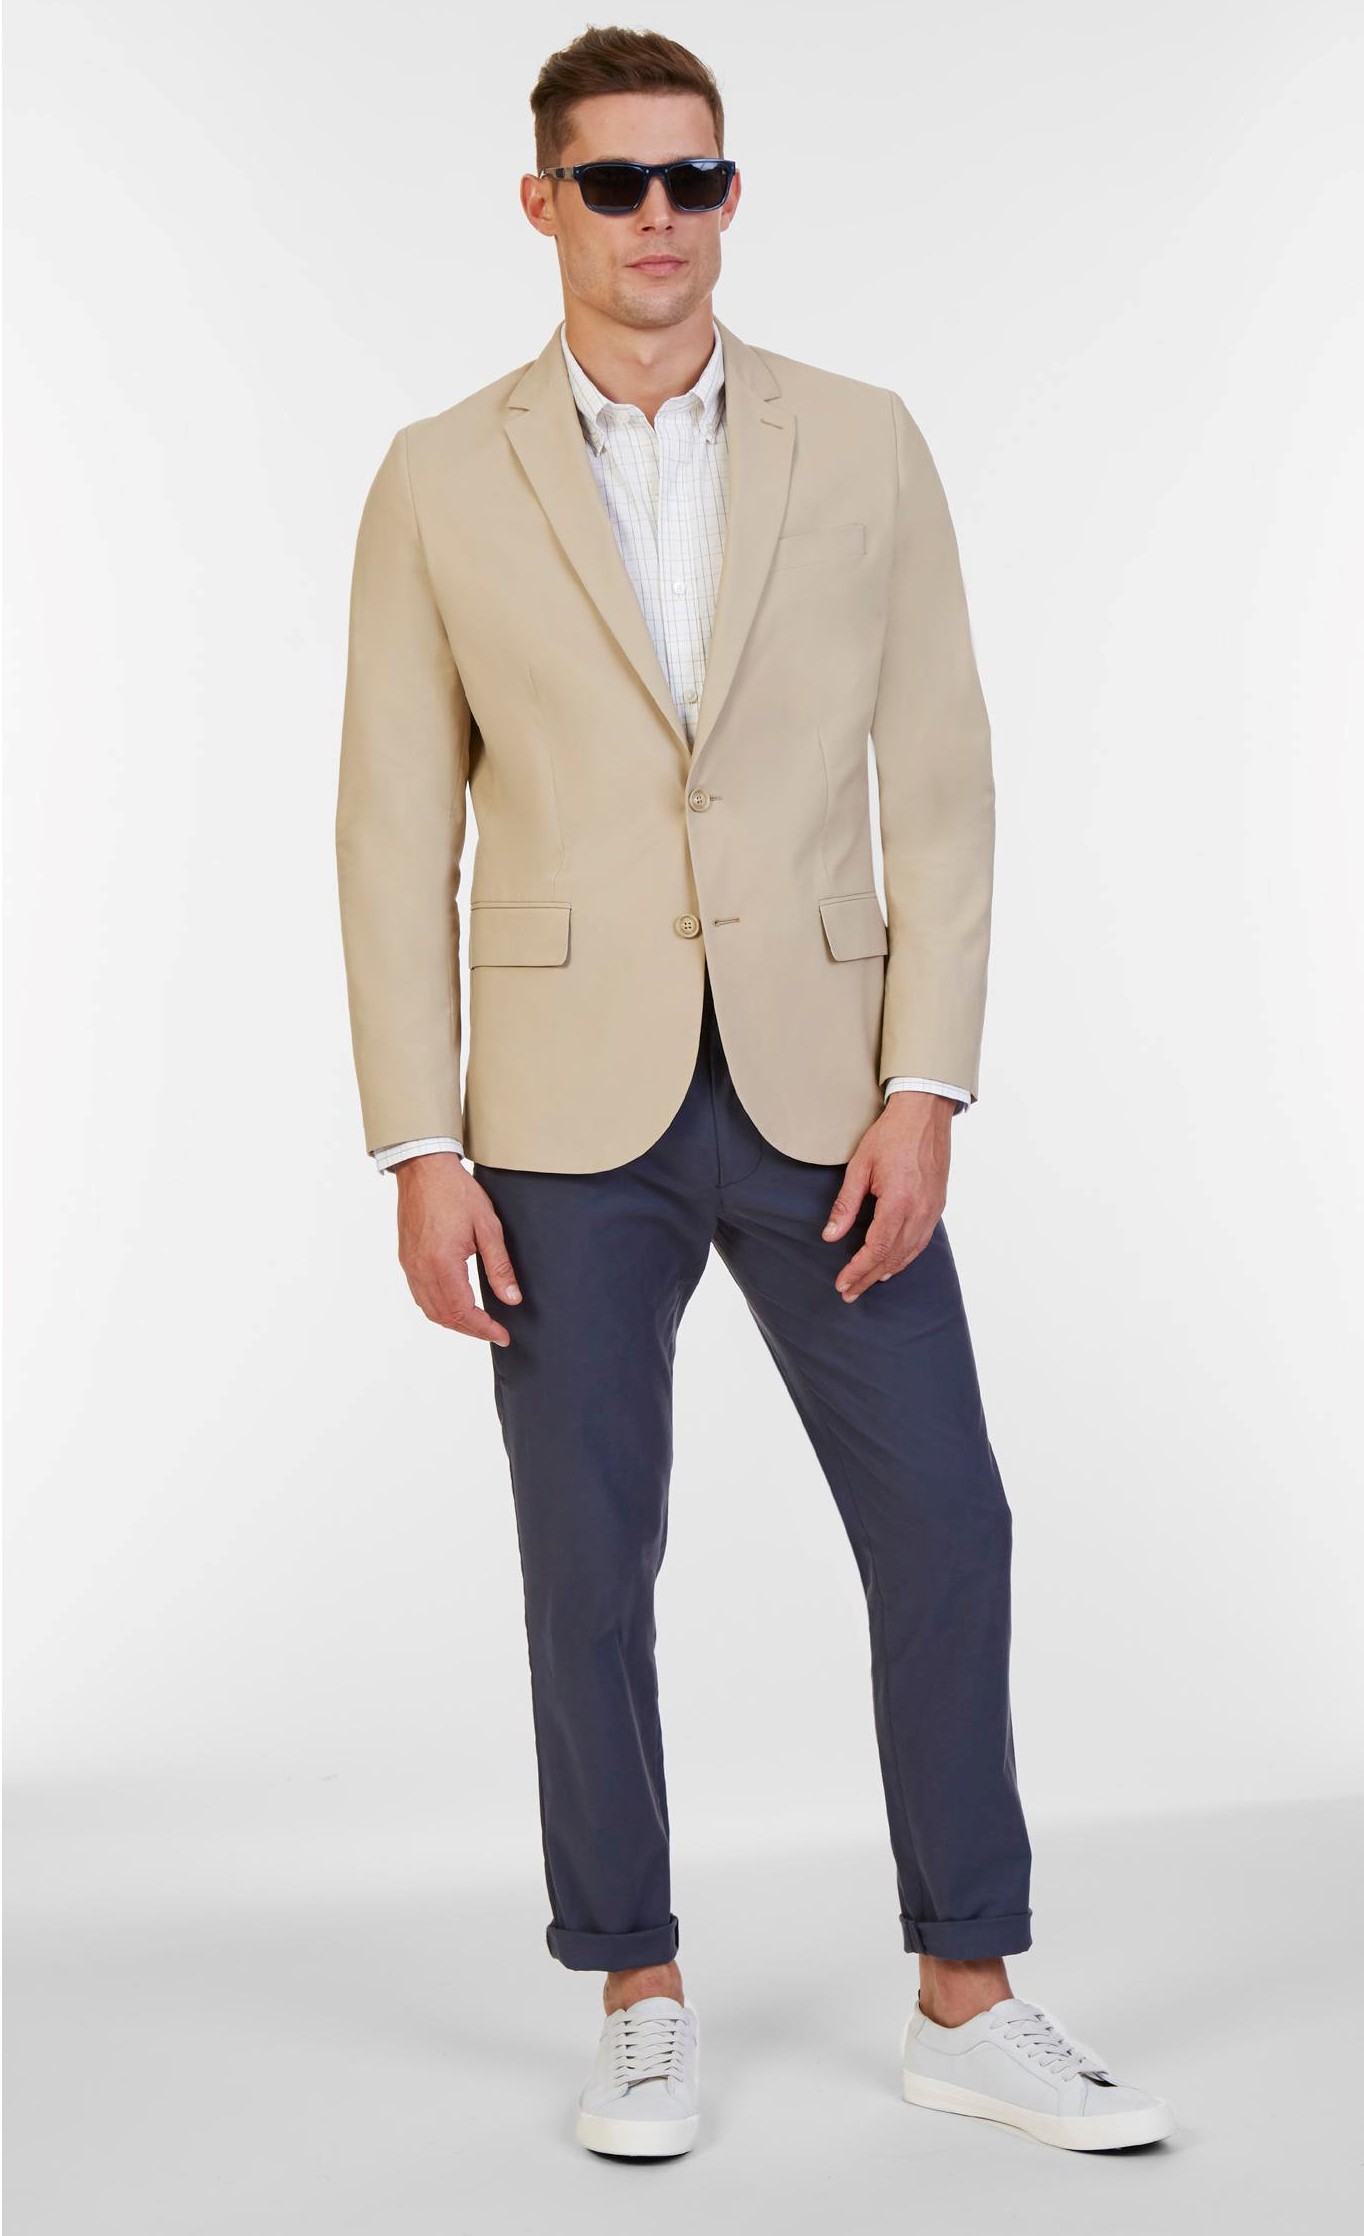 Resort Chic And Beach Wedding Attire For Men 6 Pinoy Guy Guide